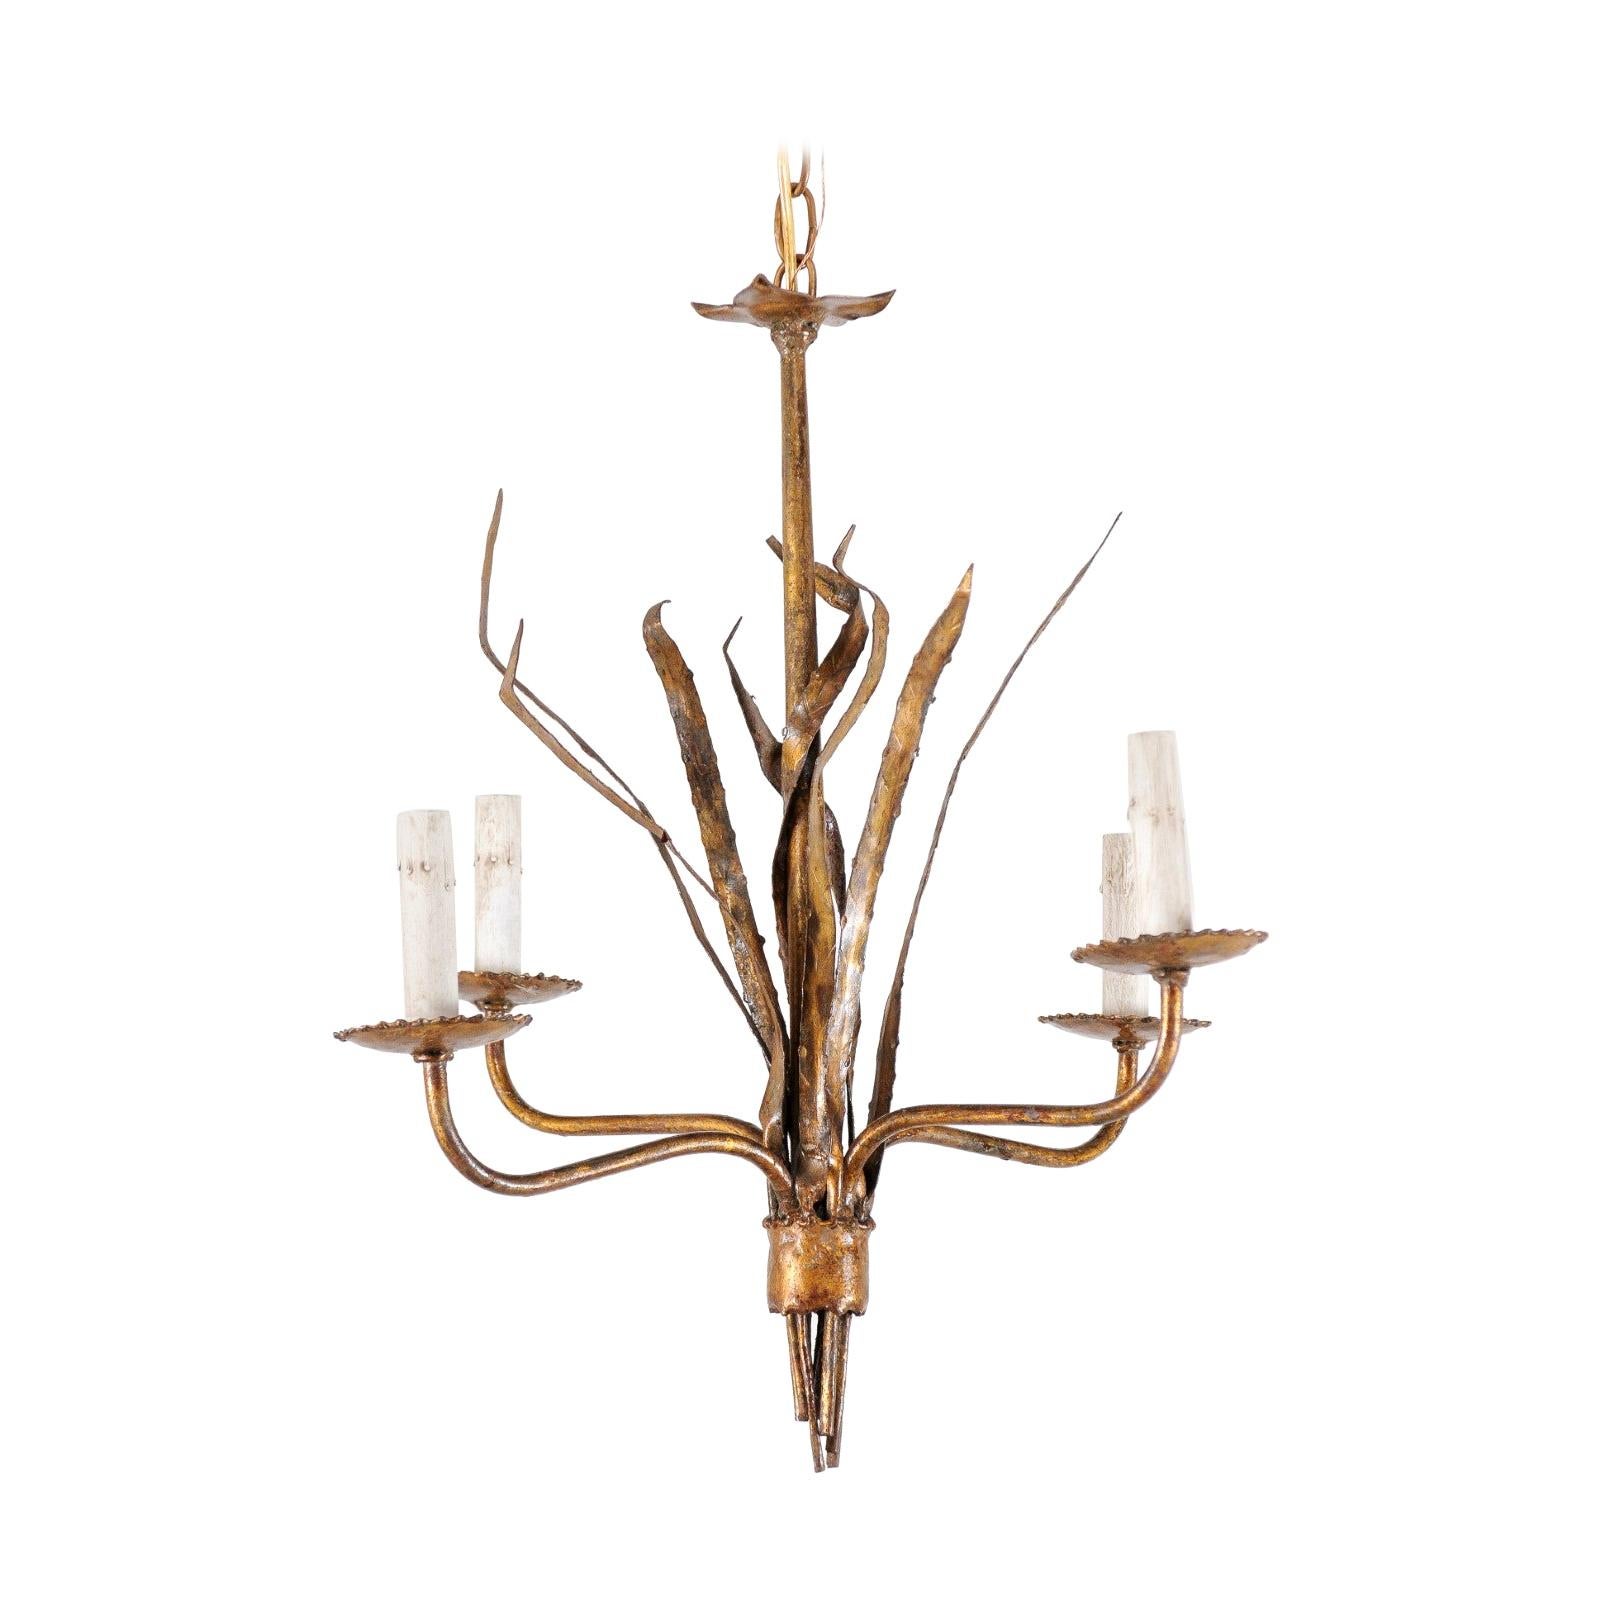 French Mid-20th Century Four-Light Iron Toned Chandelier in Leaf Foliage Motif For Sale